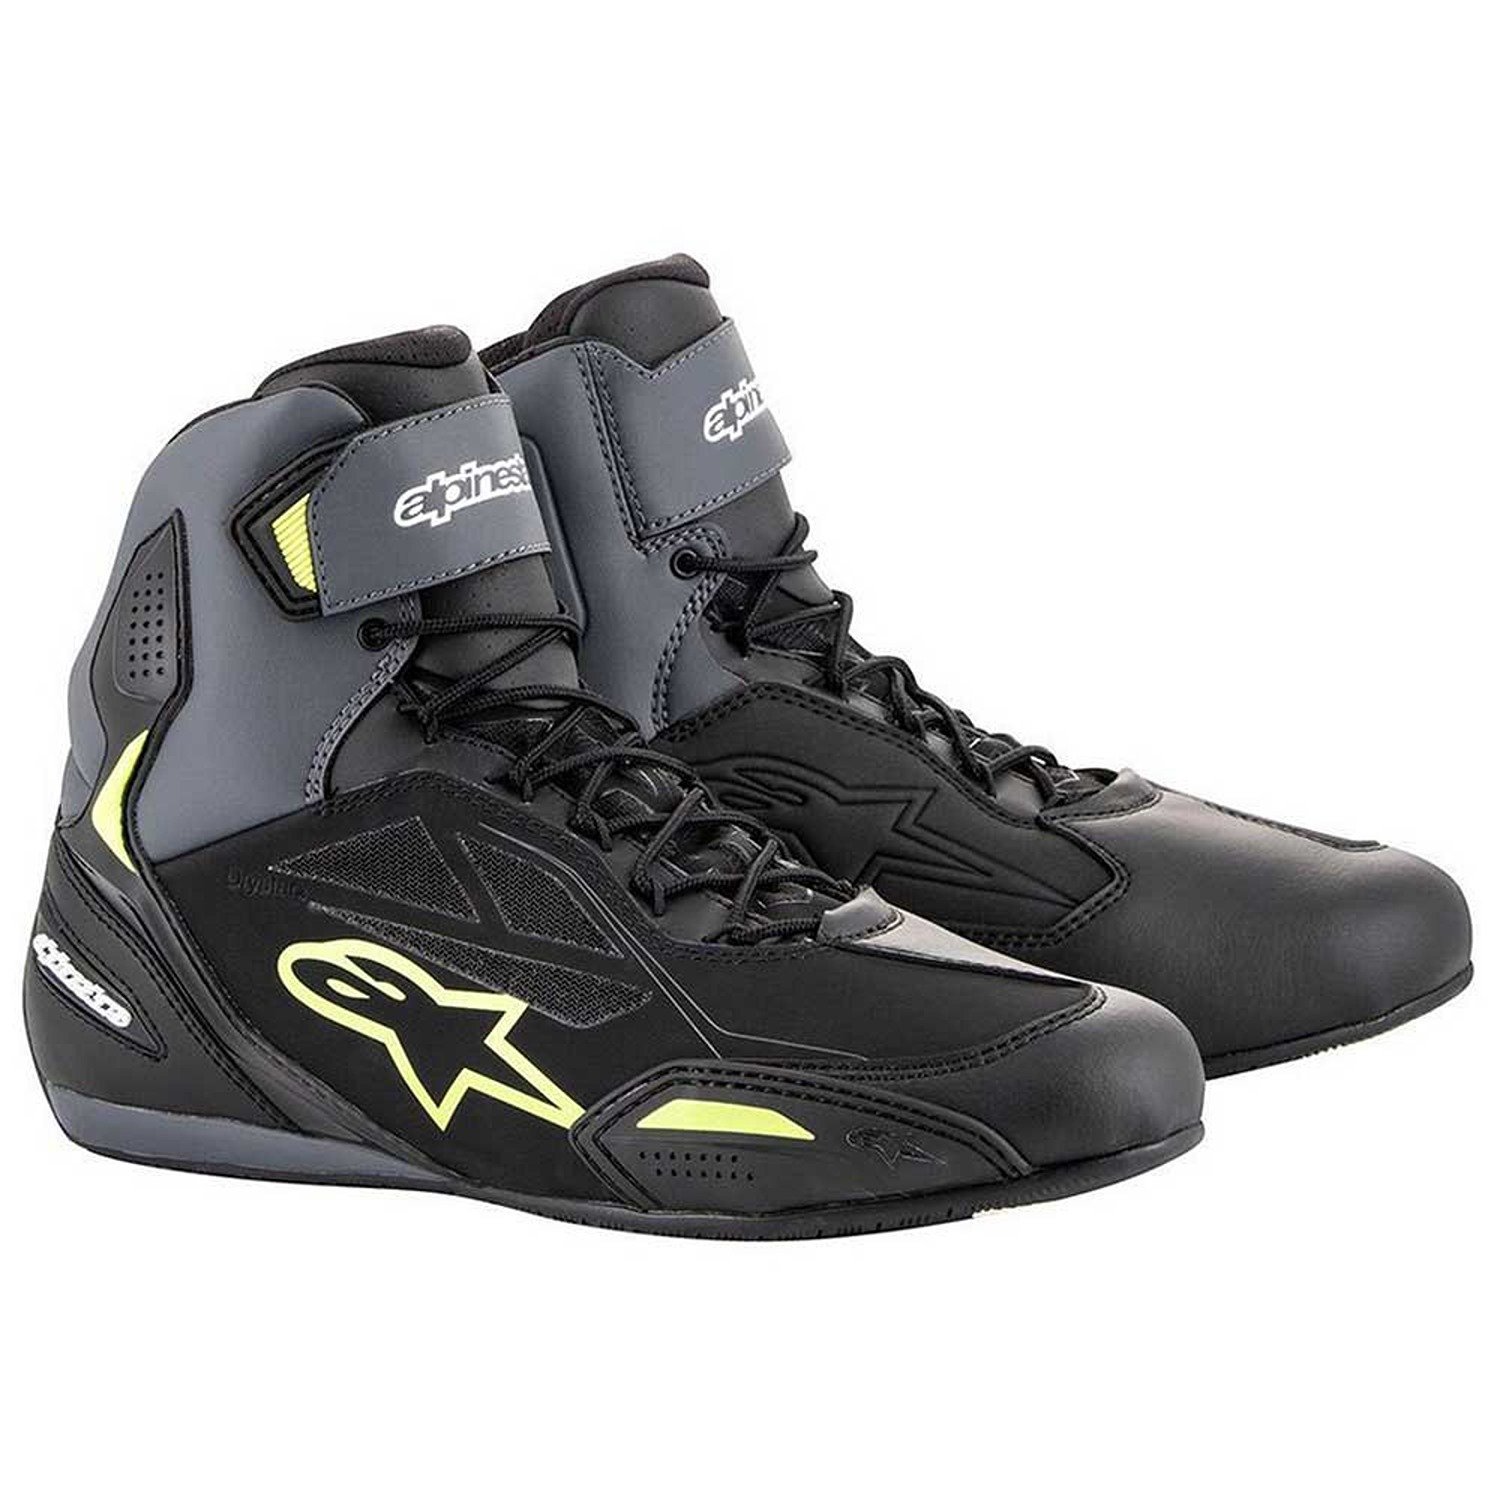 Image of Alpinestars Faster-3 Shoes Black Yellow Fluo Size US 7 EN